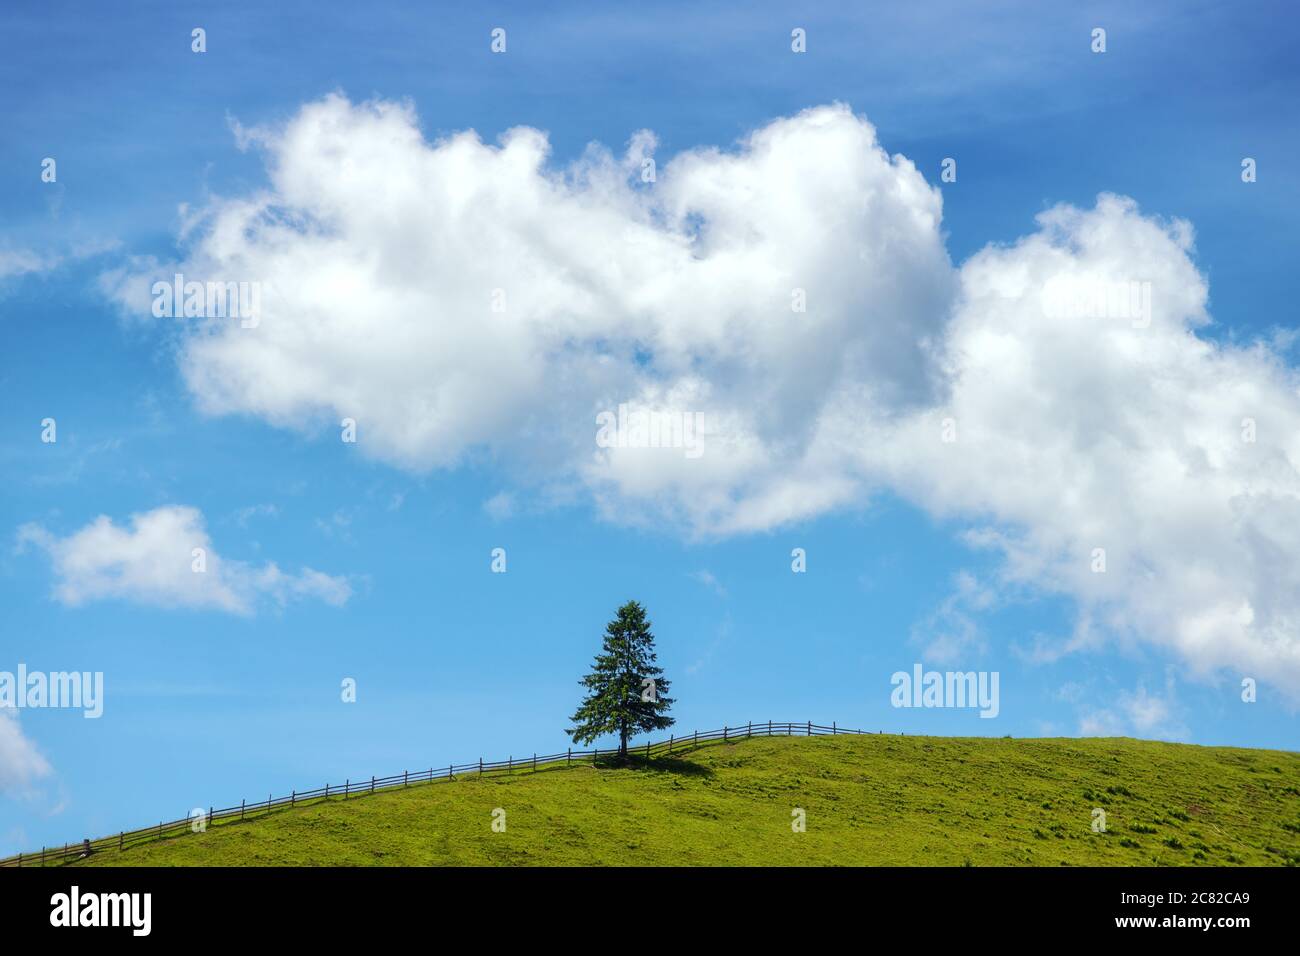 Alone pine tree on the green hill and blue sky with clouds Stock Photo